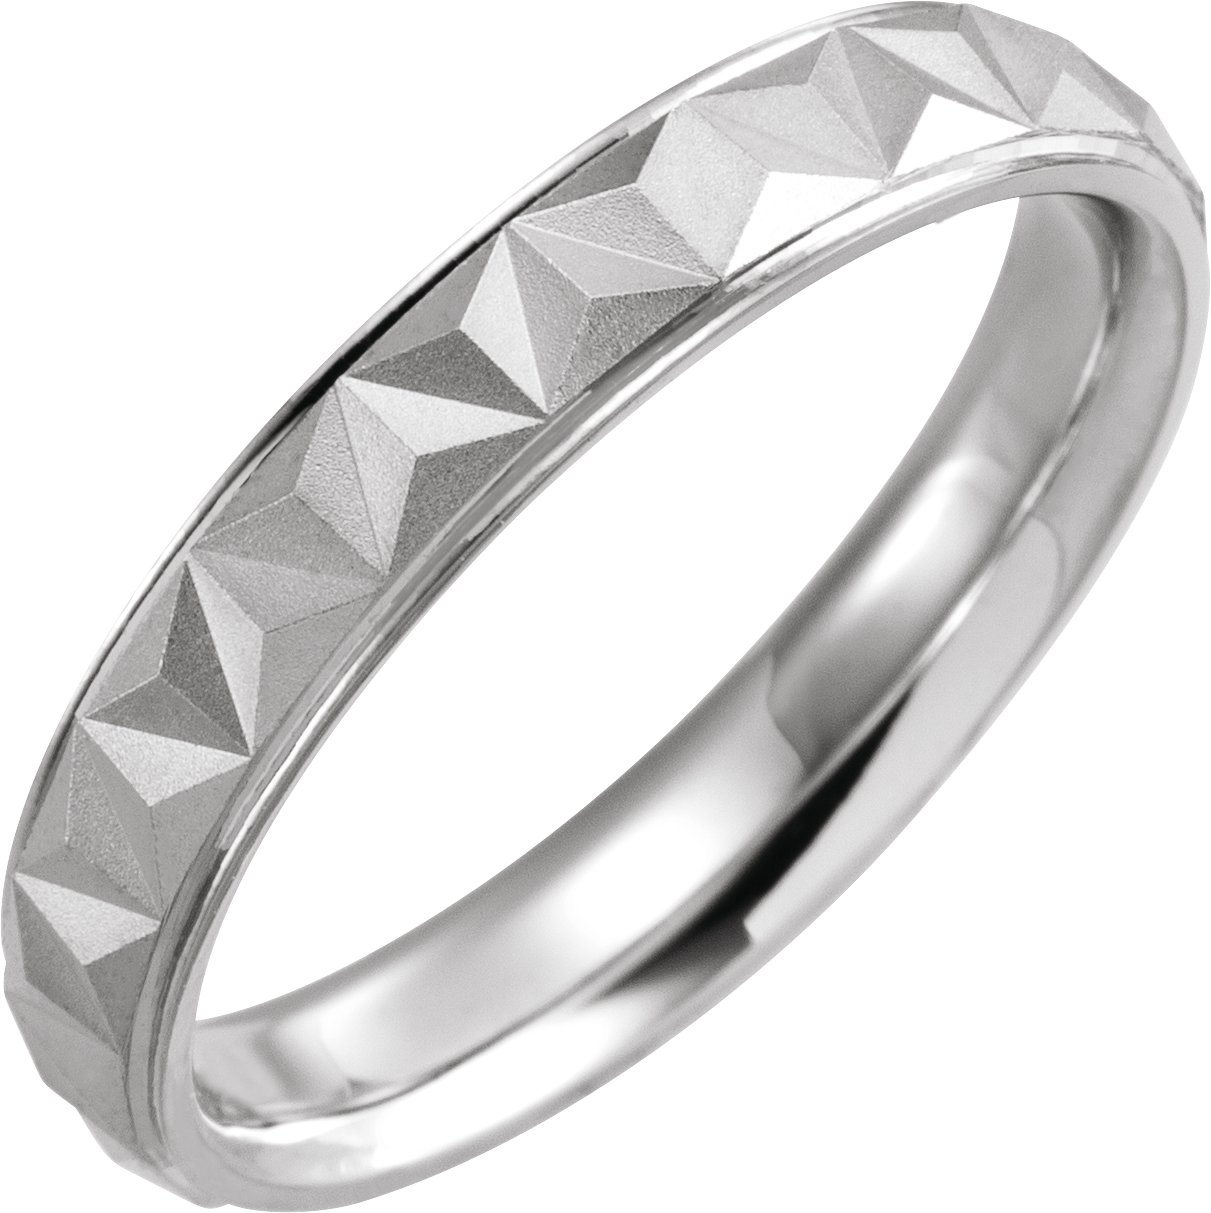 Continuum Sterling Silver 4 mm Geometric Band with Matte/Polished Finish Size 16